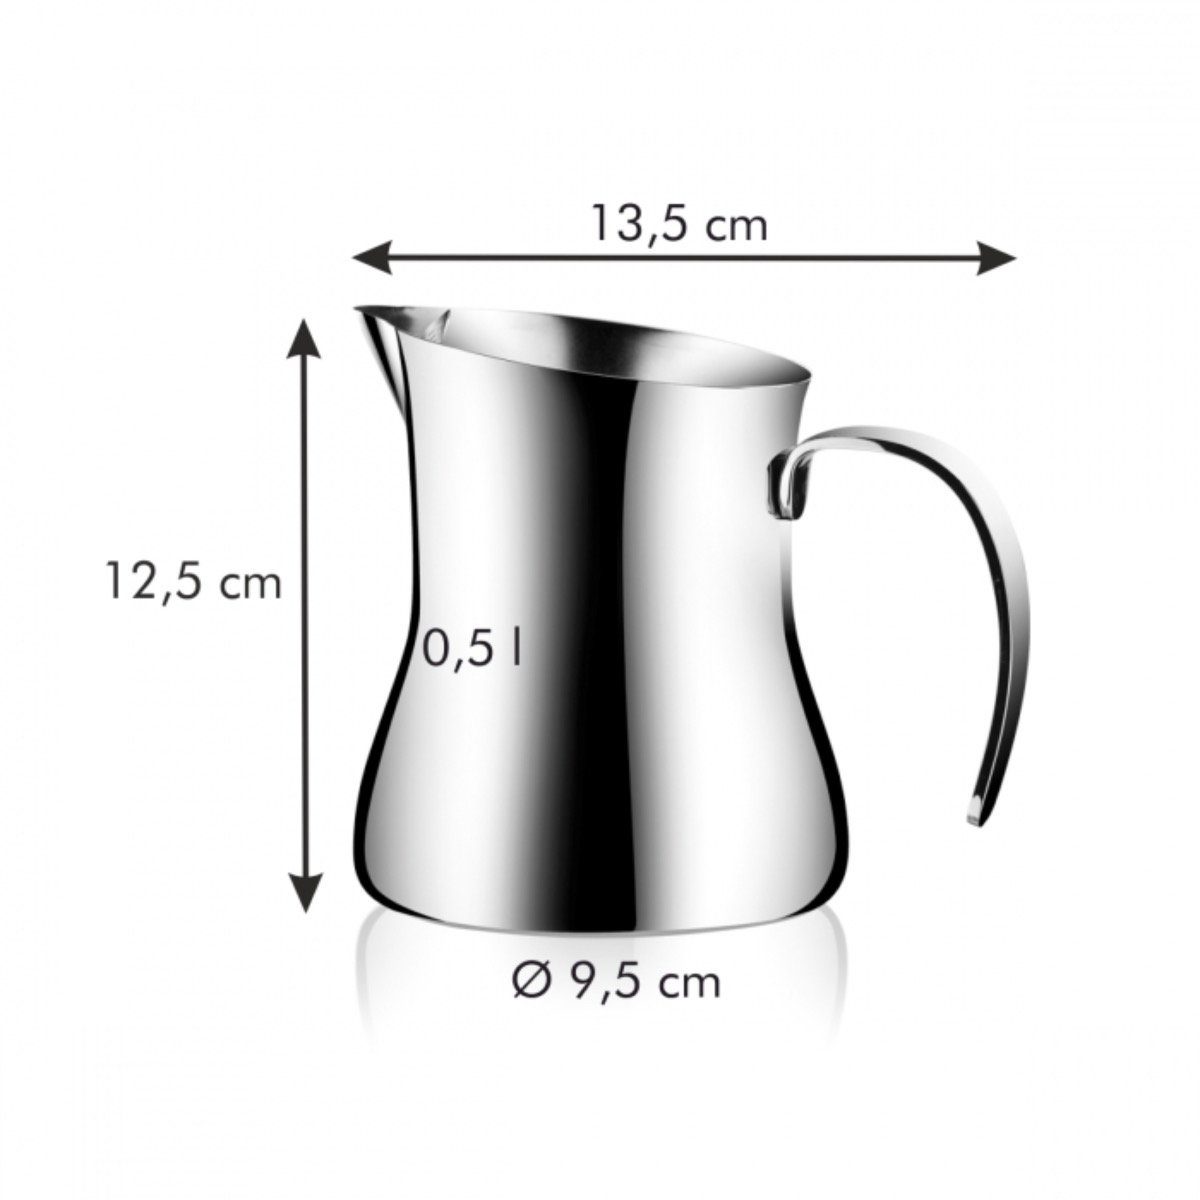 Kännchen Milchkännchen Milchkännchen), l, 0.5 Edelstahl Tescoma 2 GrandCHEF l, (Packung, 1x